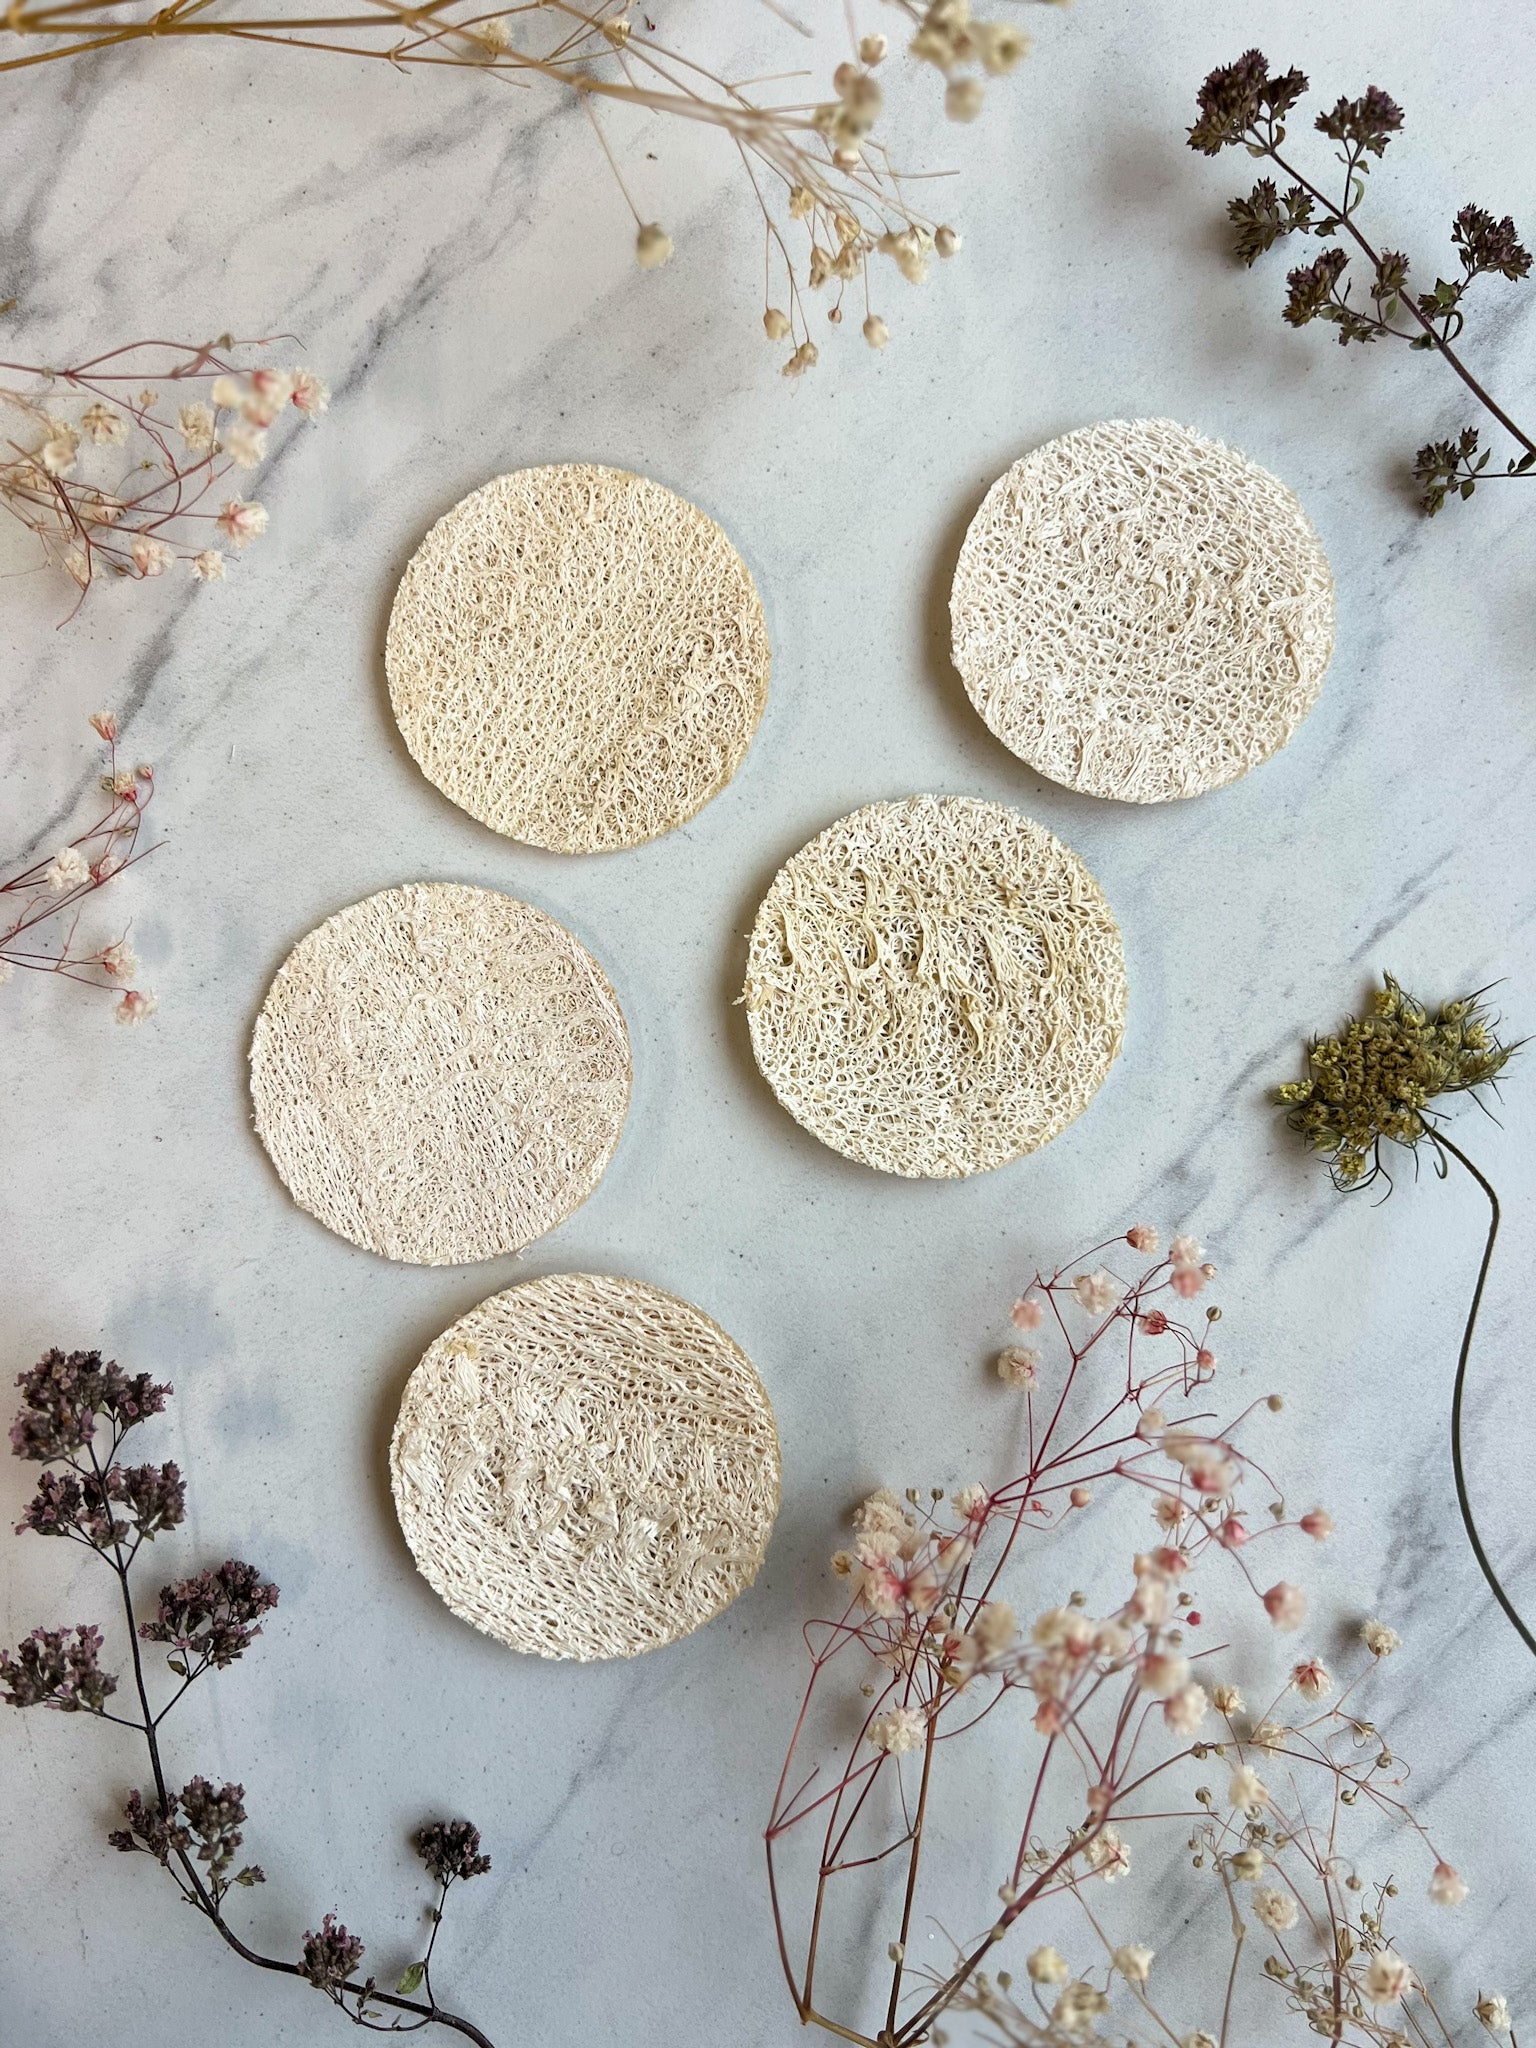 Fawn Lily Botanica | Soft Facial Luffa Sponge Rounds Exfoliate and Cleanse